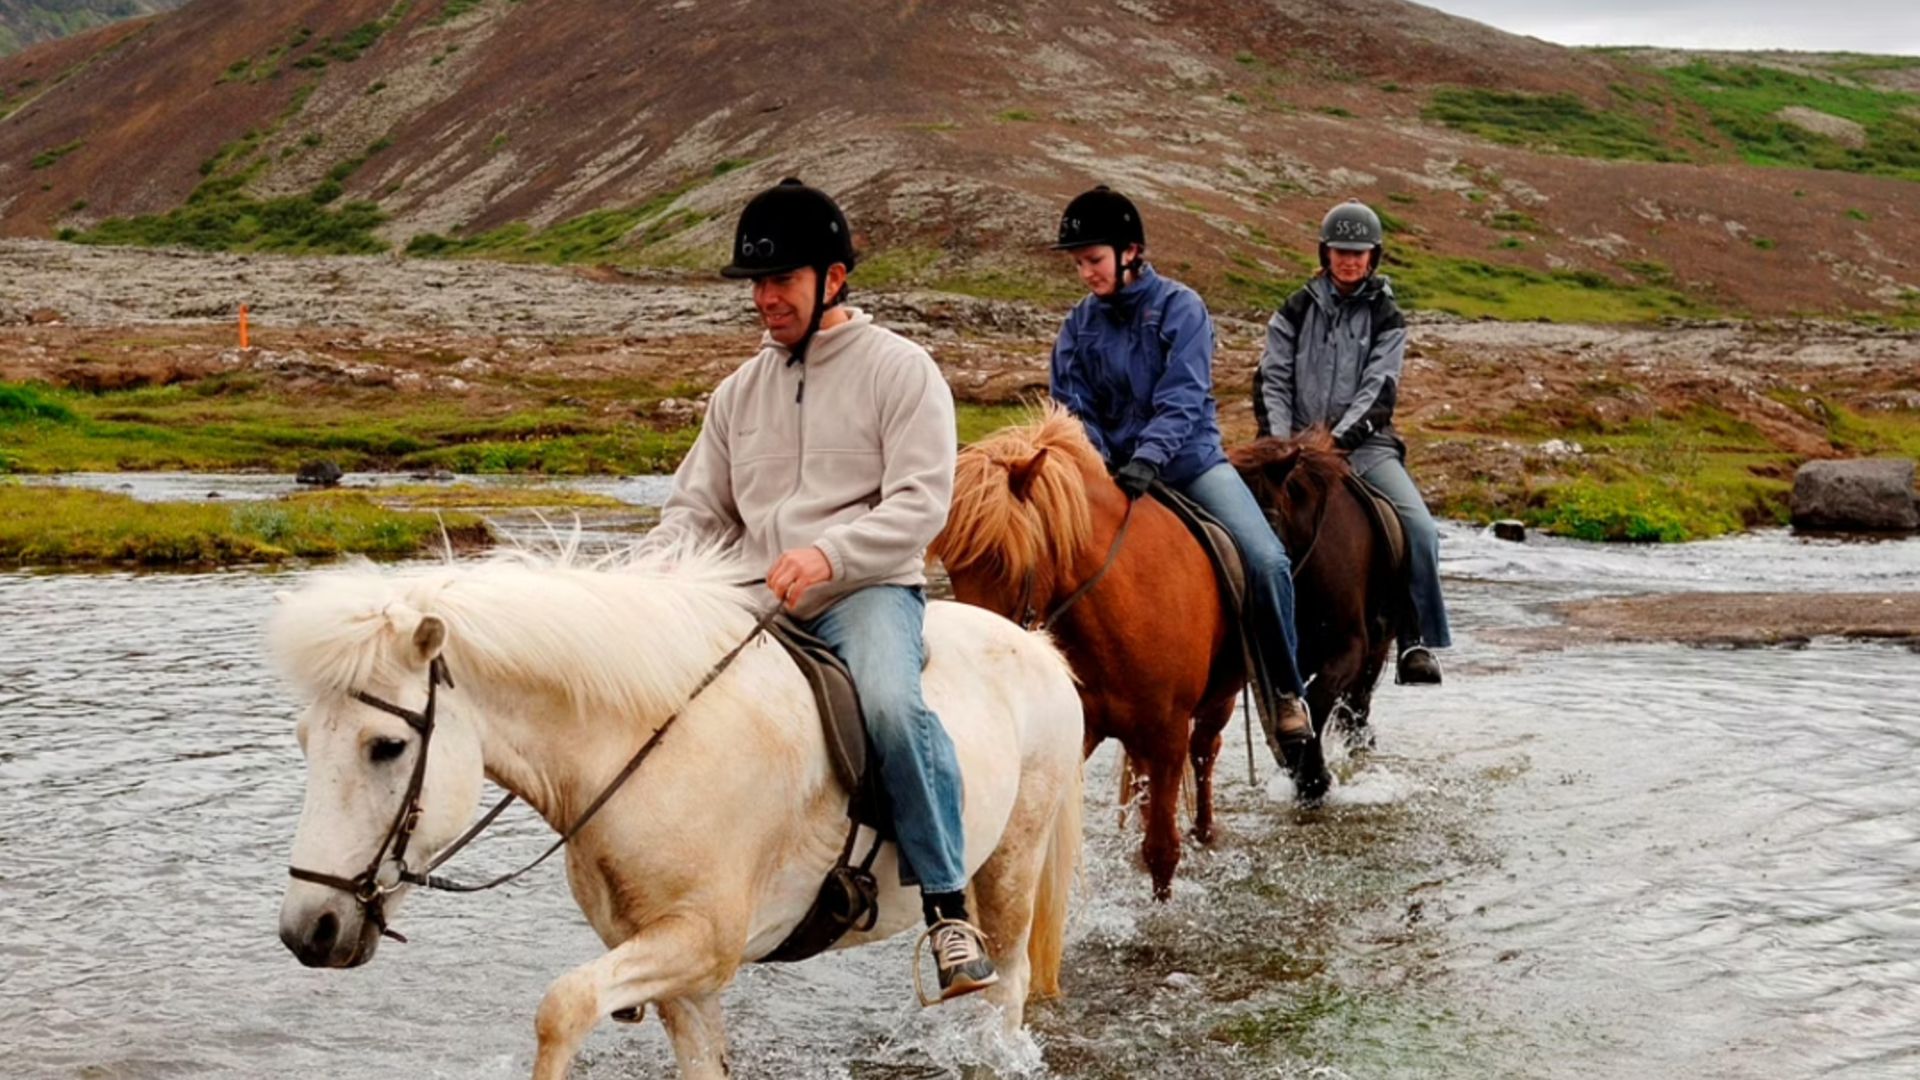 Crossing a river on a horse in Iceland